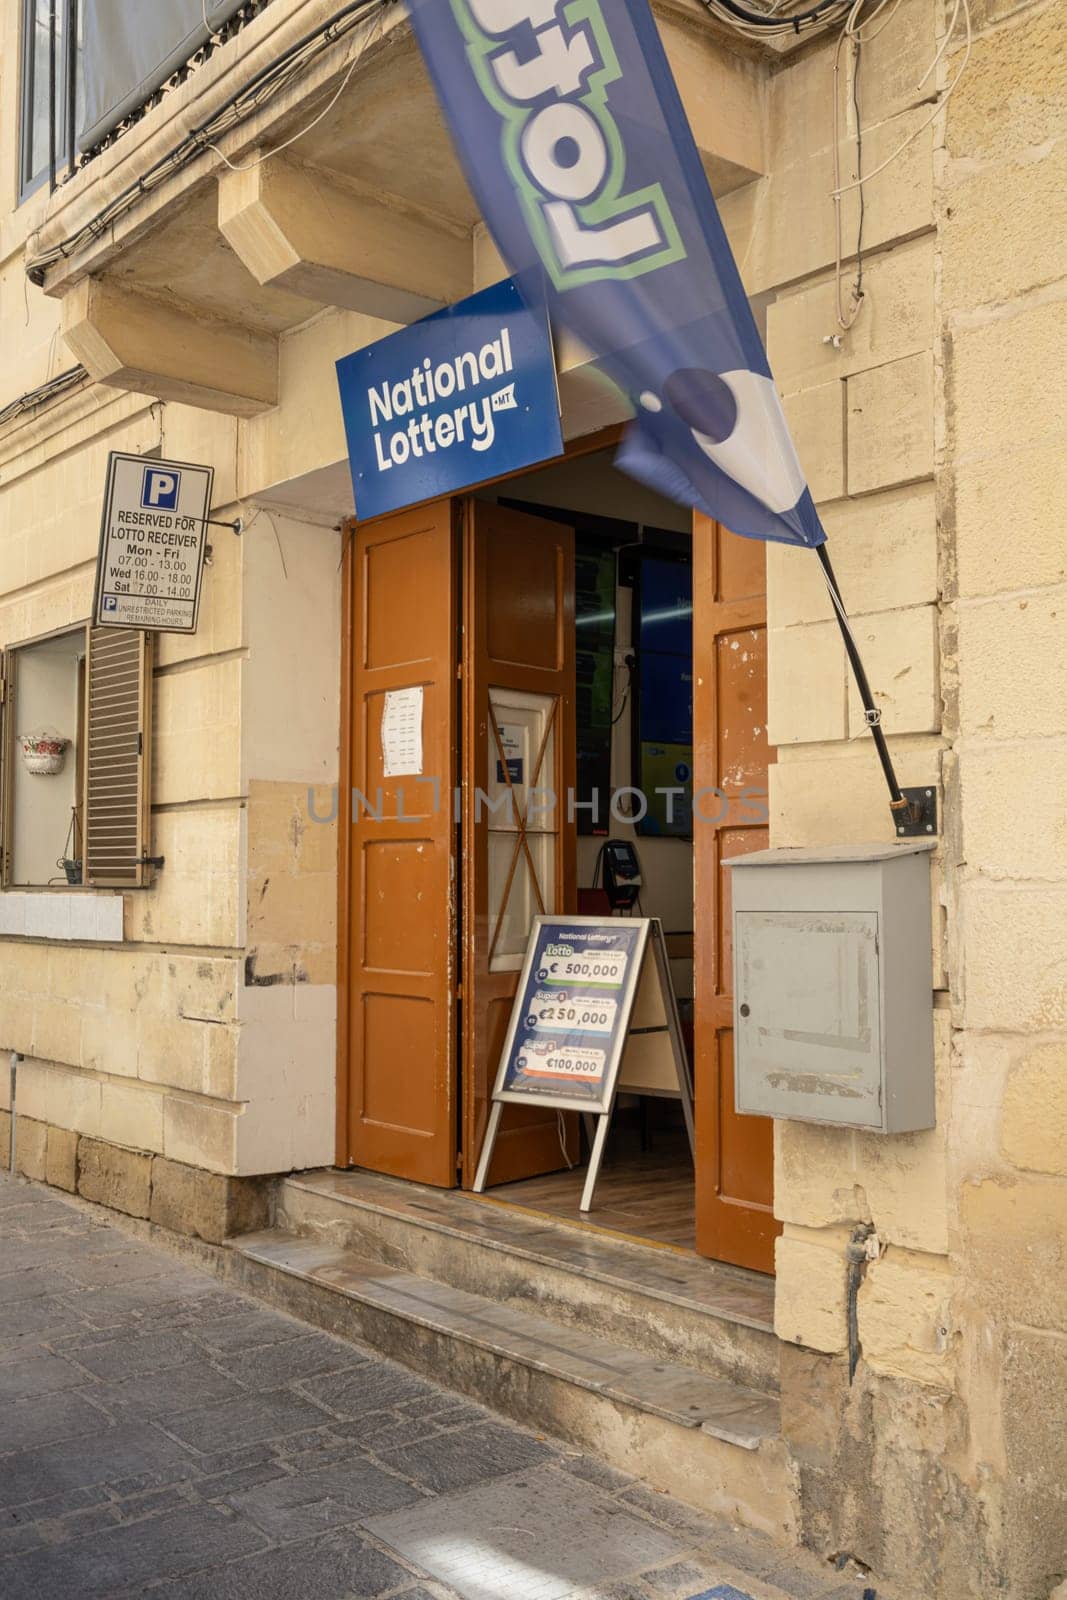  national lottery tickets shop in Valletta, Malta by sergiodv